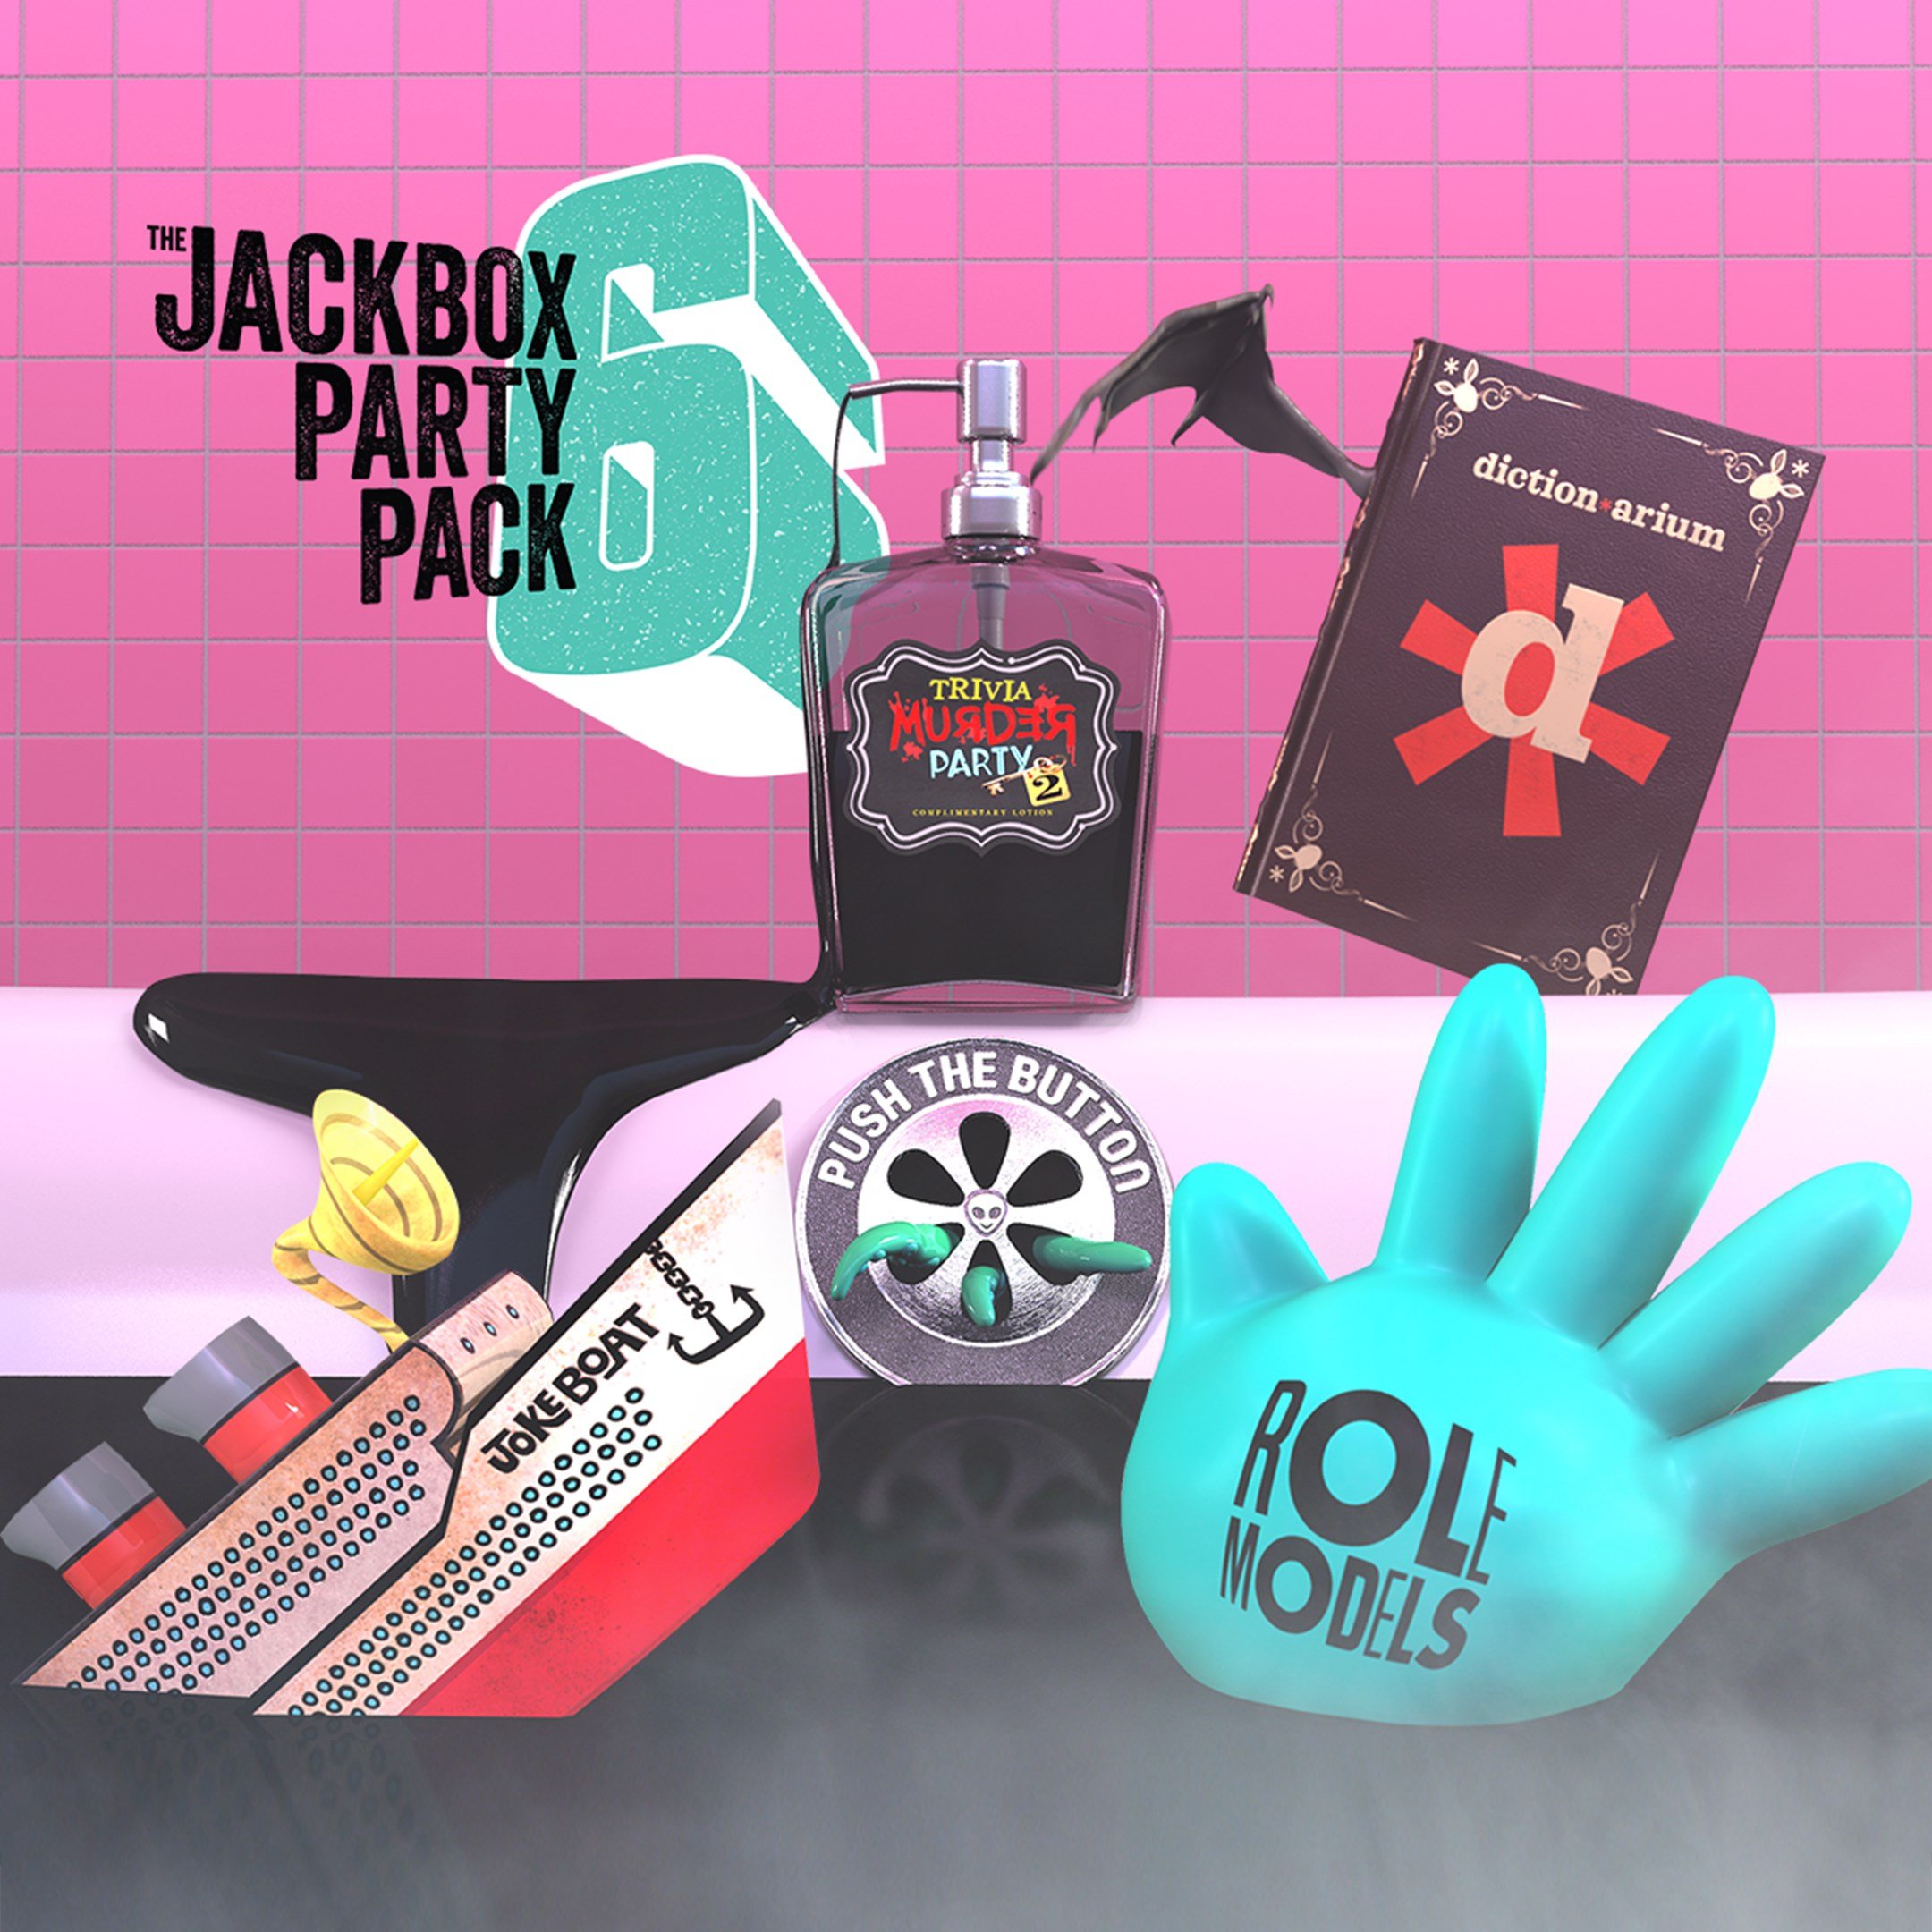 Boxart for The Jackbox Party Pack 6